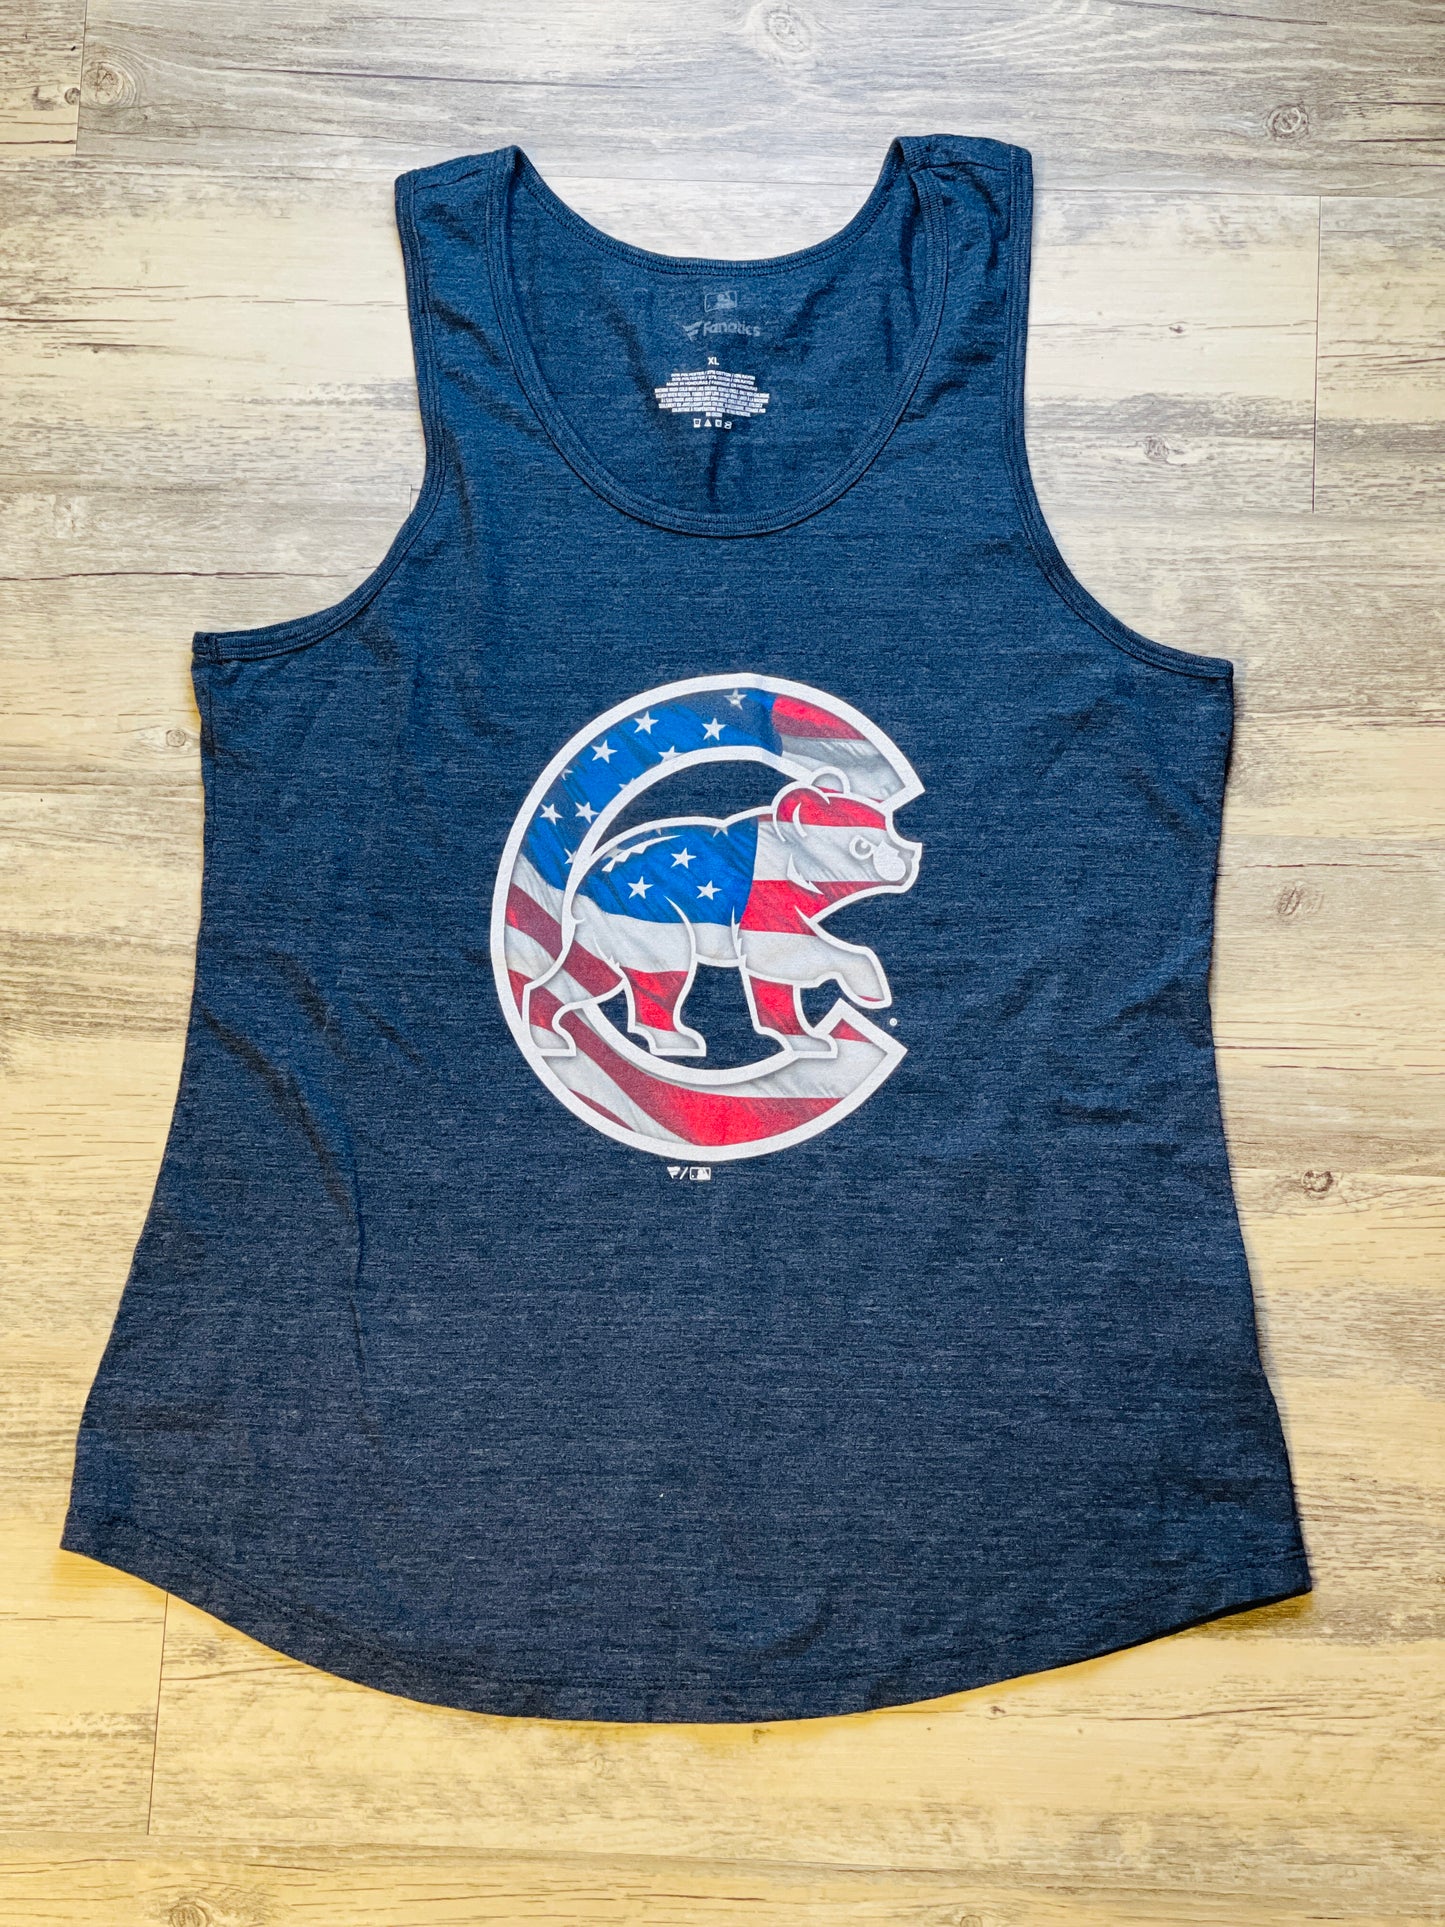 Chicago Cubs "Rizzo 44" Navy Blue Patriotic Tank - XL